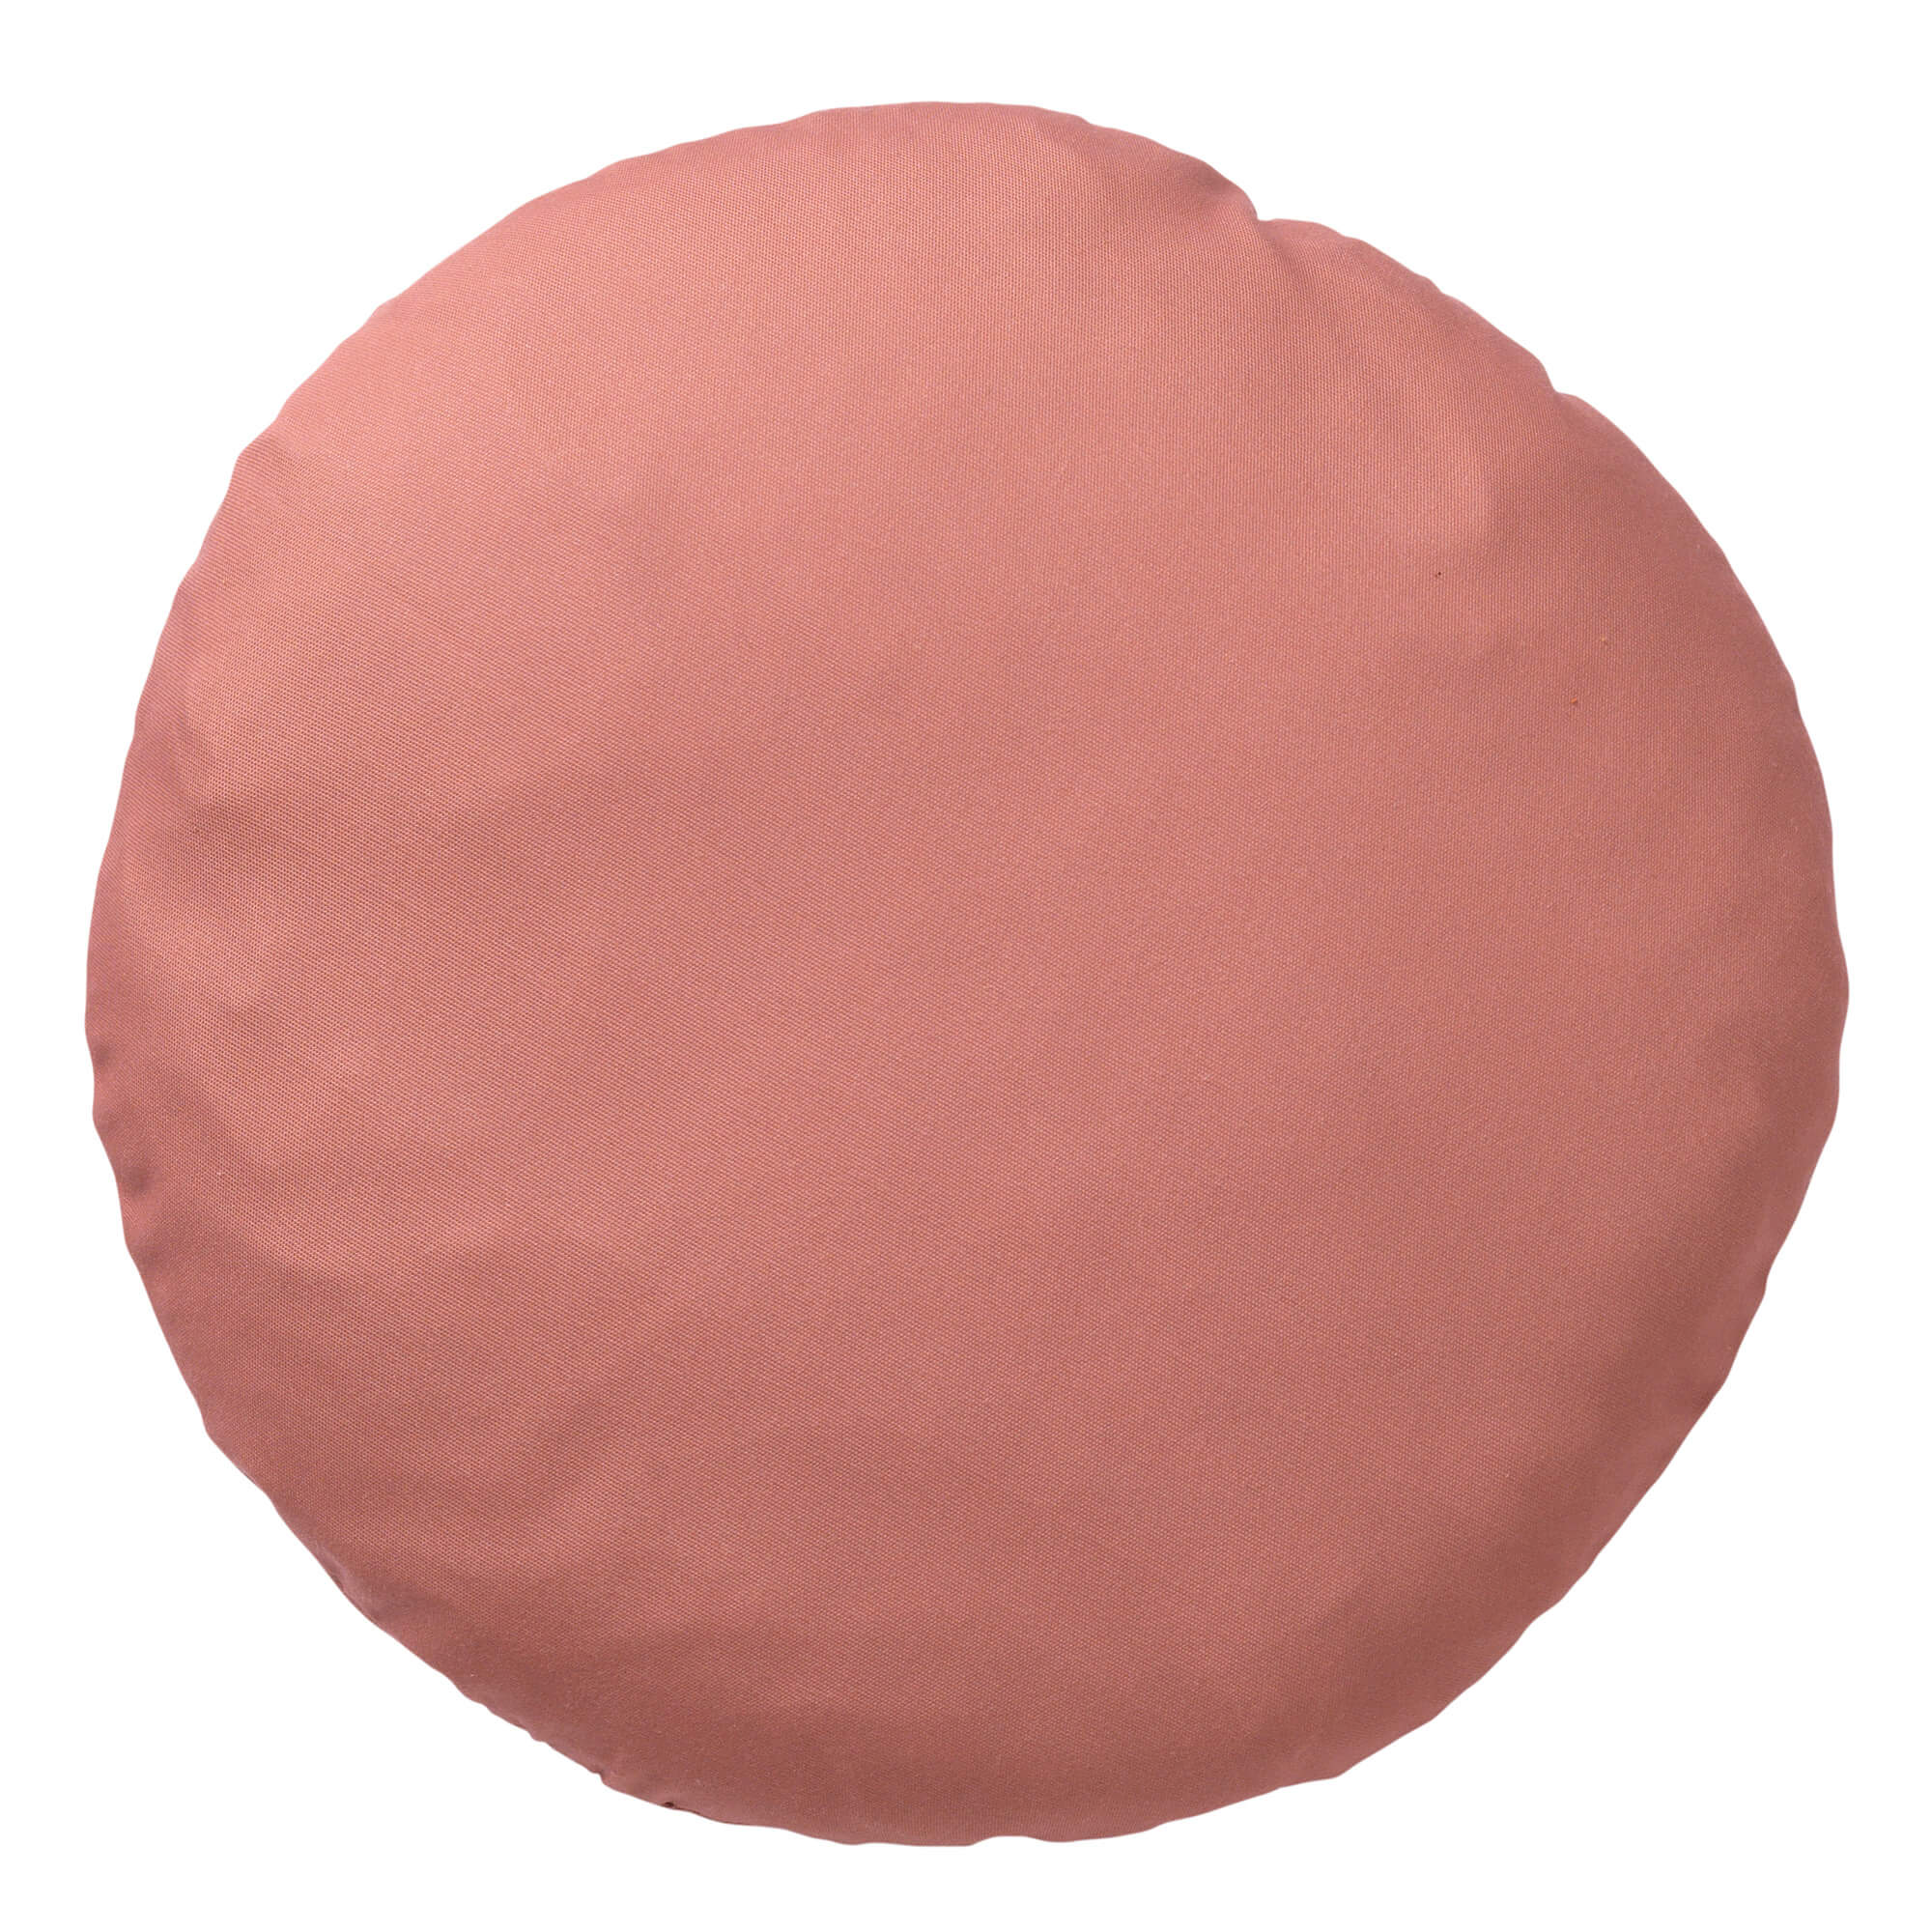 SOL - Outdoor Cushion Ø40 cm - waterproof & UV-resistant - Muted Clay - pink